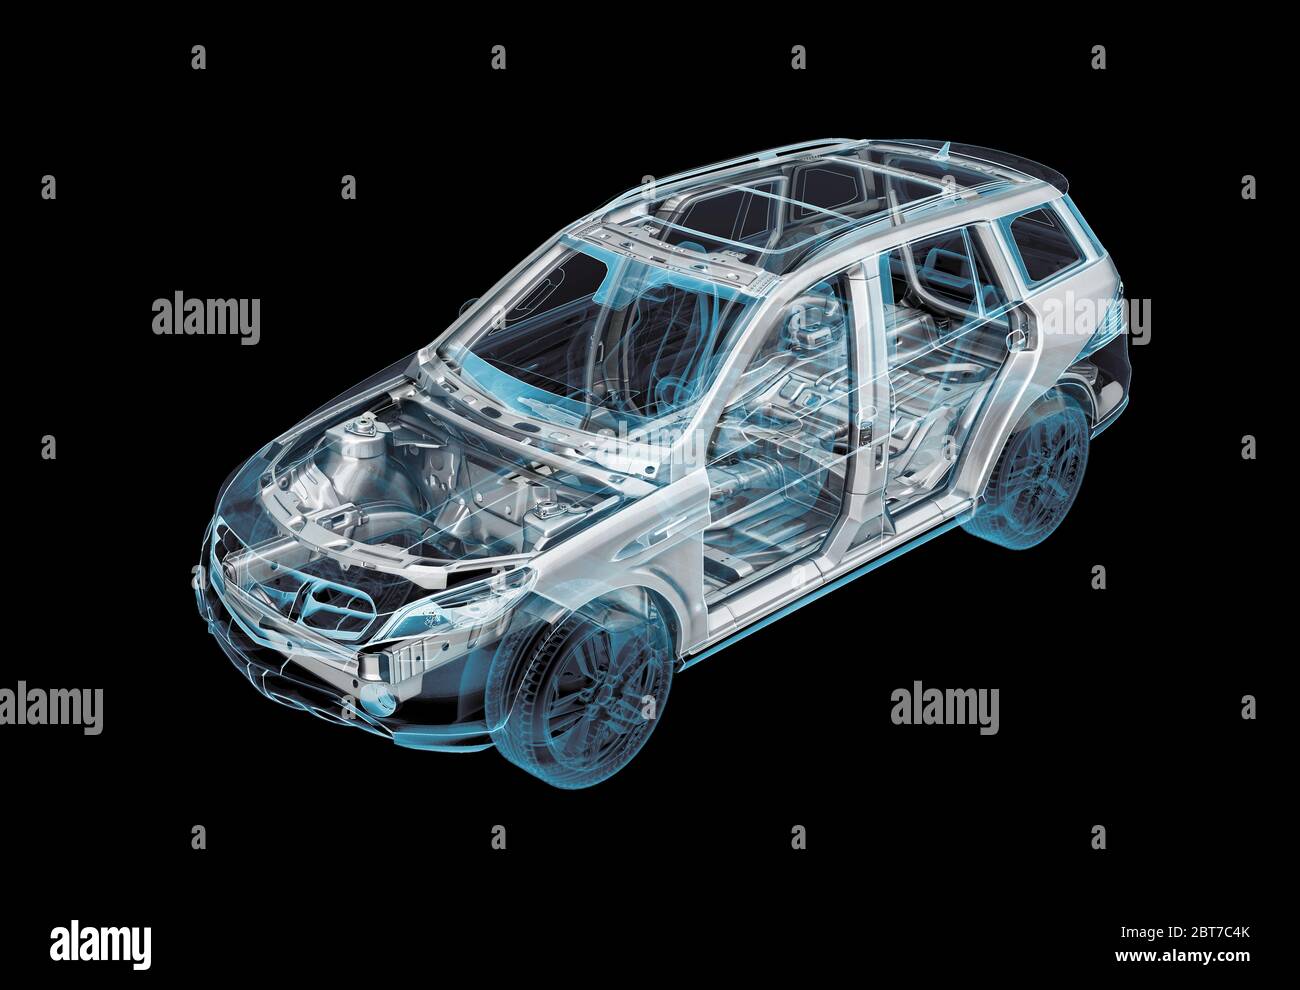 Technical 3d illustration of SUV car with x-ray effect and chassis system. Perspective view on black background. Stock Photo